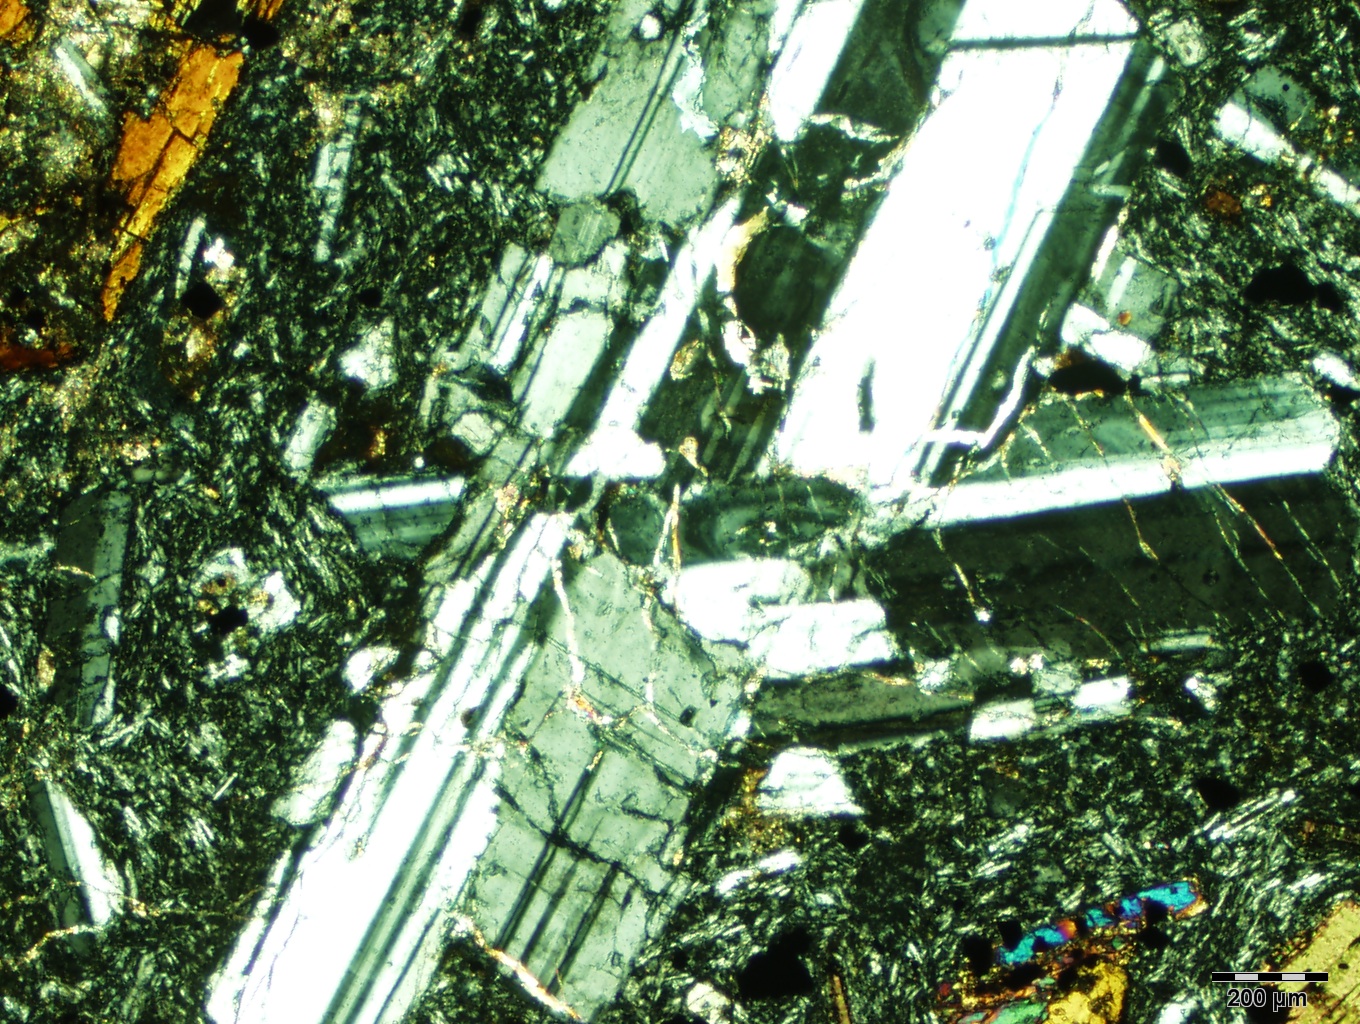 Plagioclase rotated 90 degrees